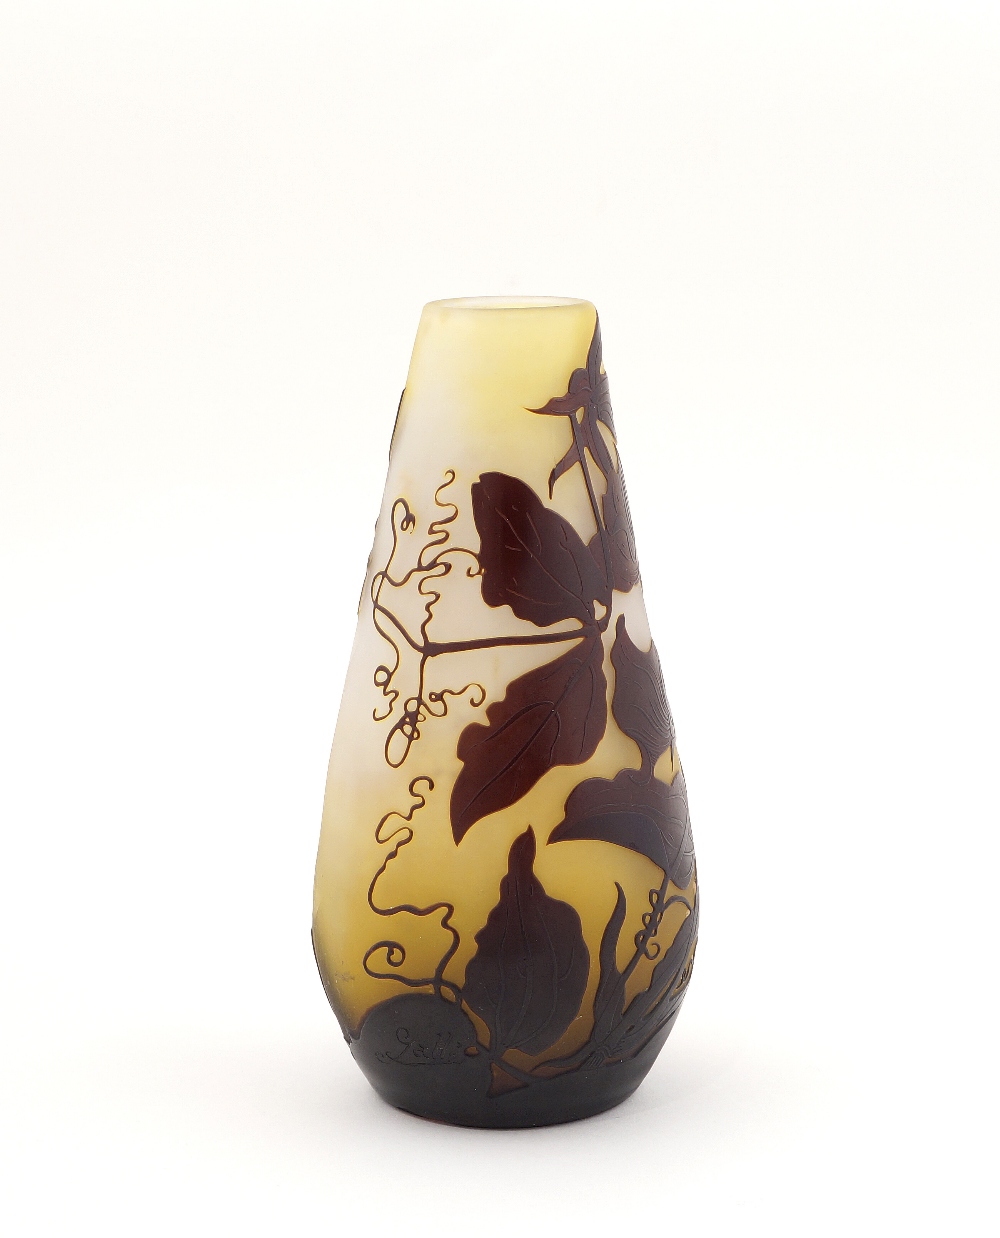 Emille Galle' A small cameo glass vase, signed Nancy, 1846-1904 h. 16,5 cm. - Image 2 of 2